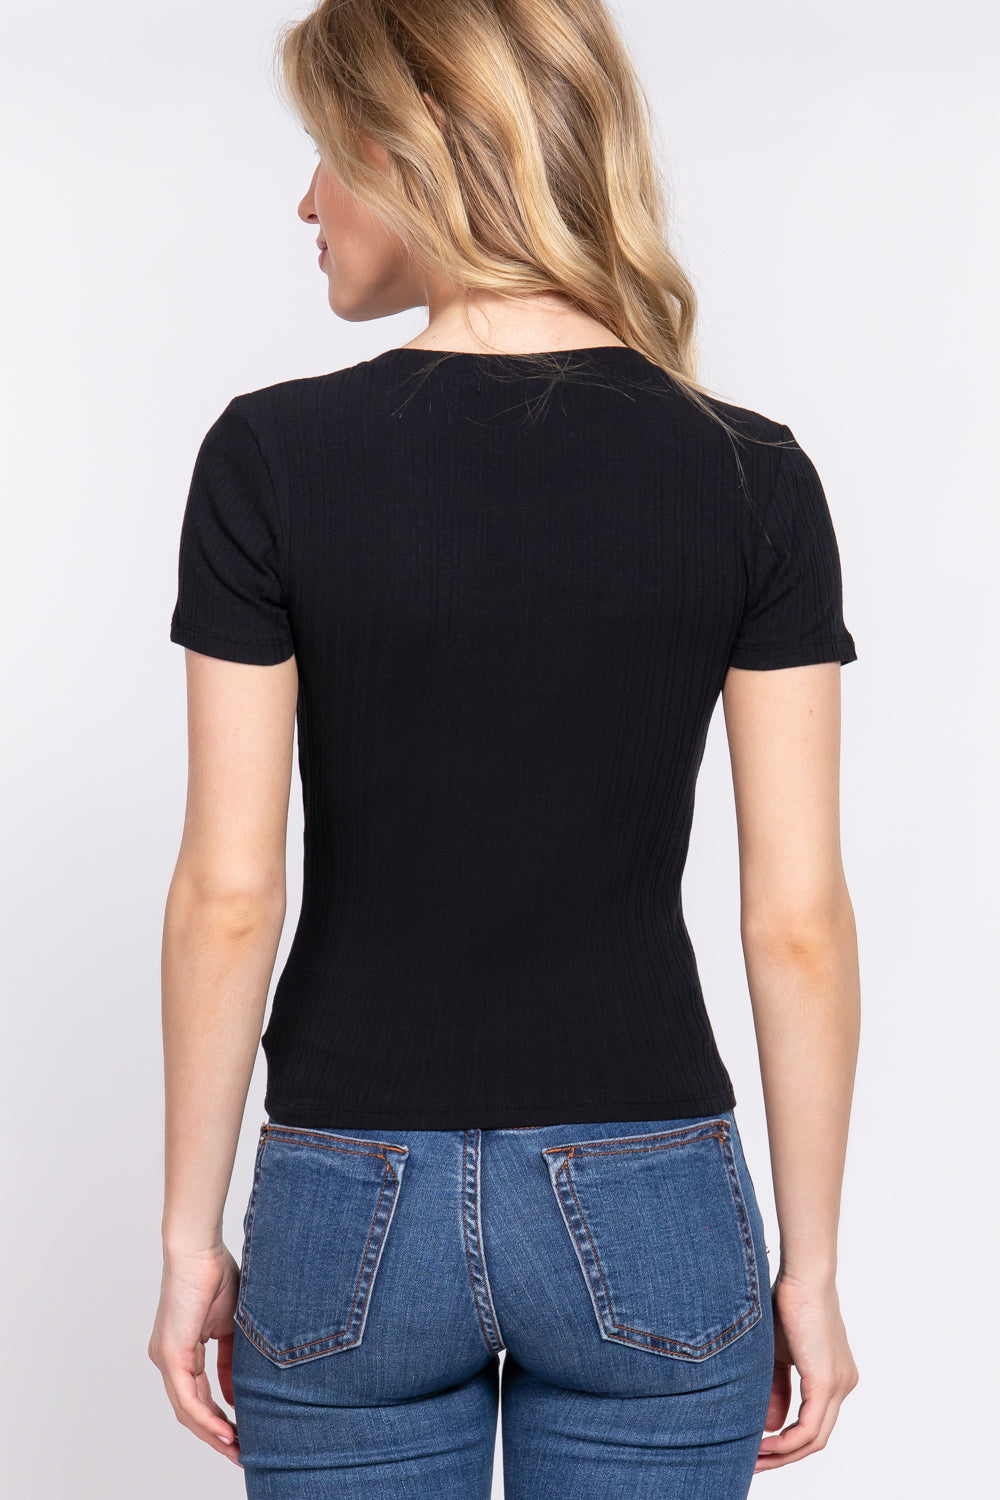 Women's black short sleeve top features a crew neckline and variegated rib knit fabric rear view